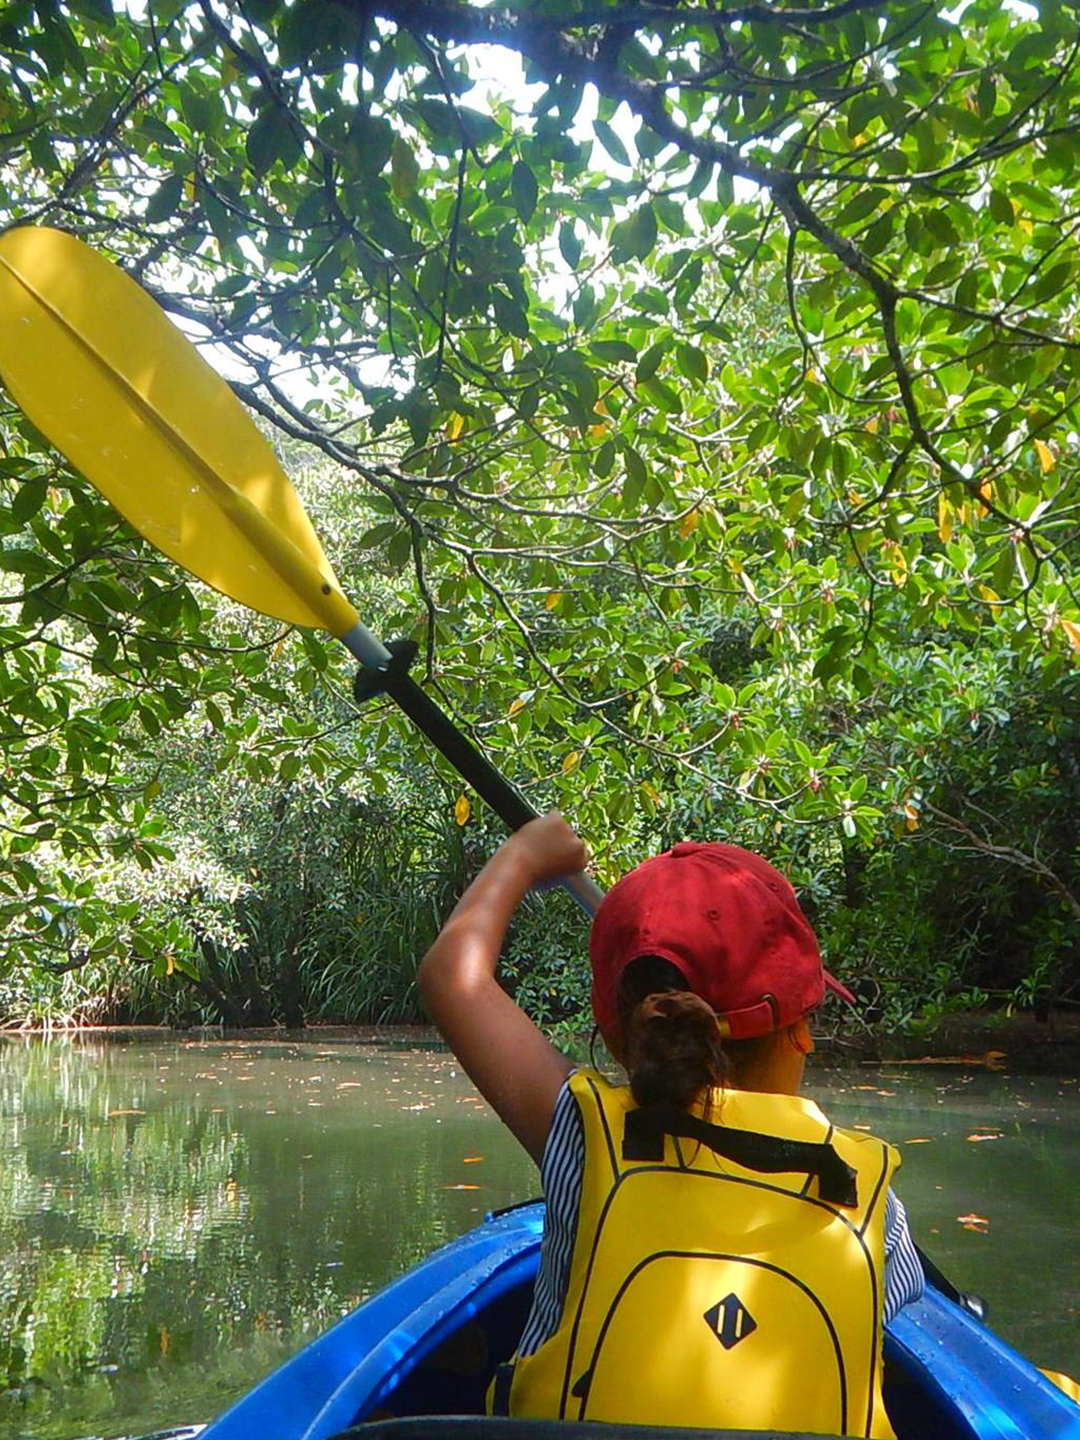 "Explore the Hidden Gems of Iriomote Island" - Take a red mangrove kayak tour with your child and experience the beauty of Maira River and Hinai Waterfall.